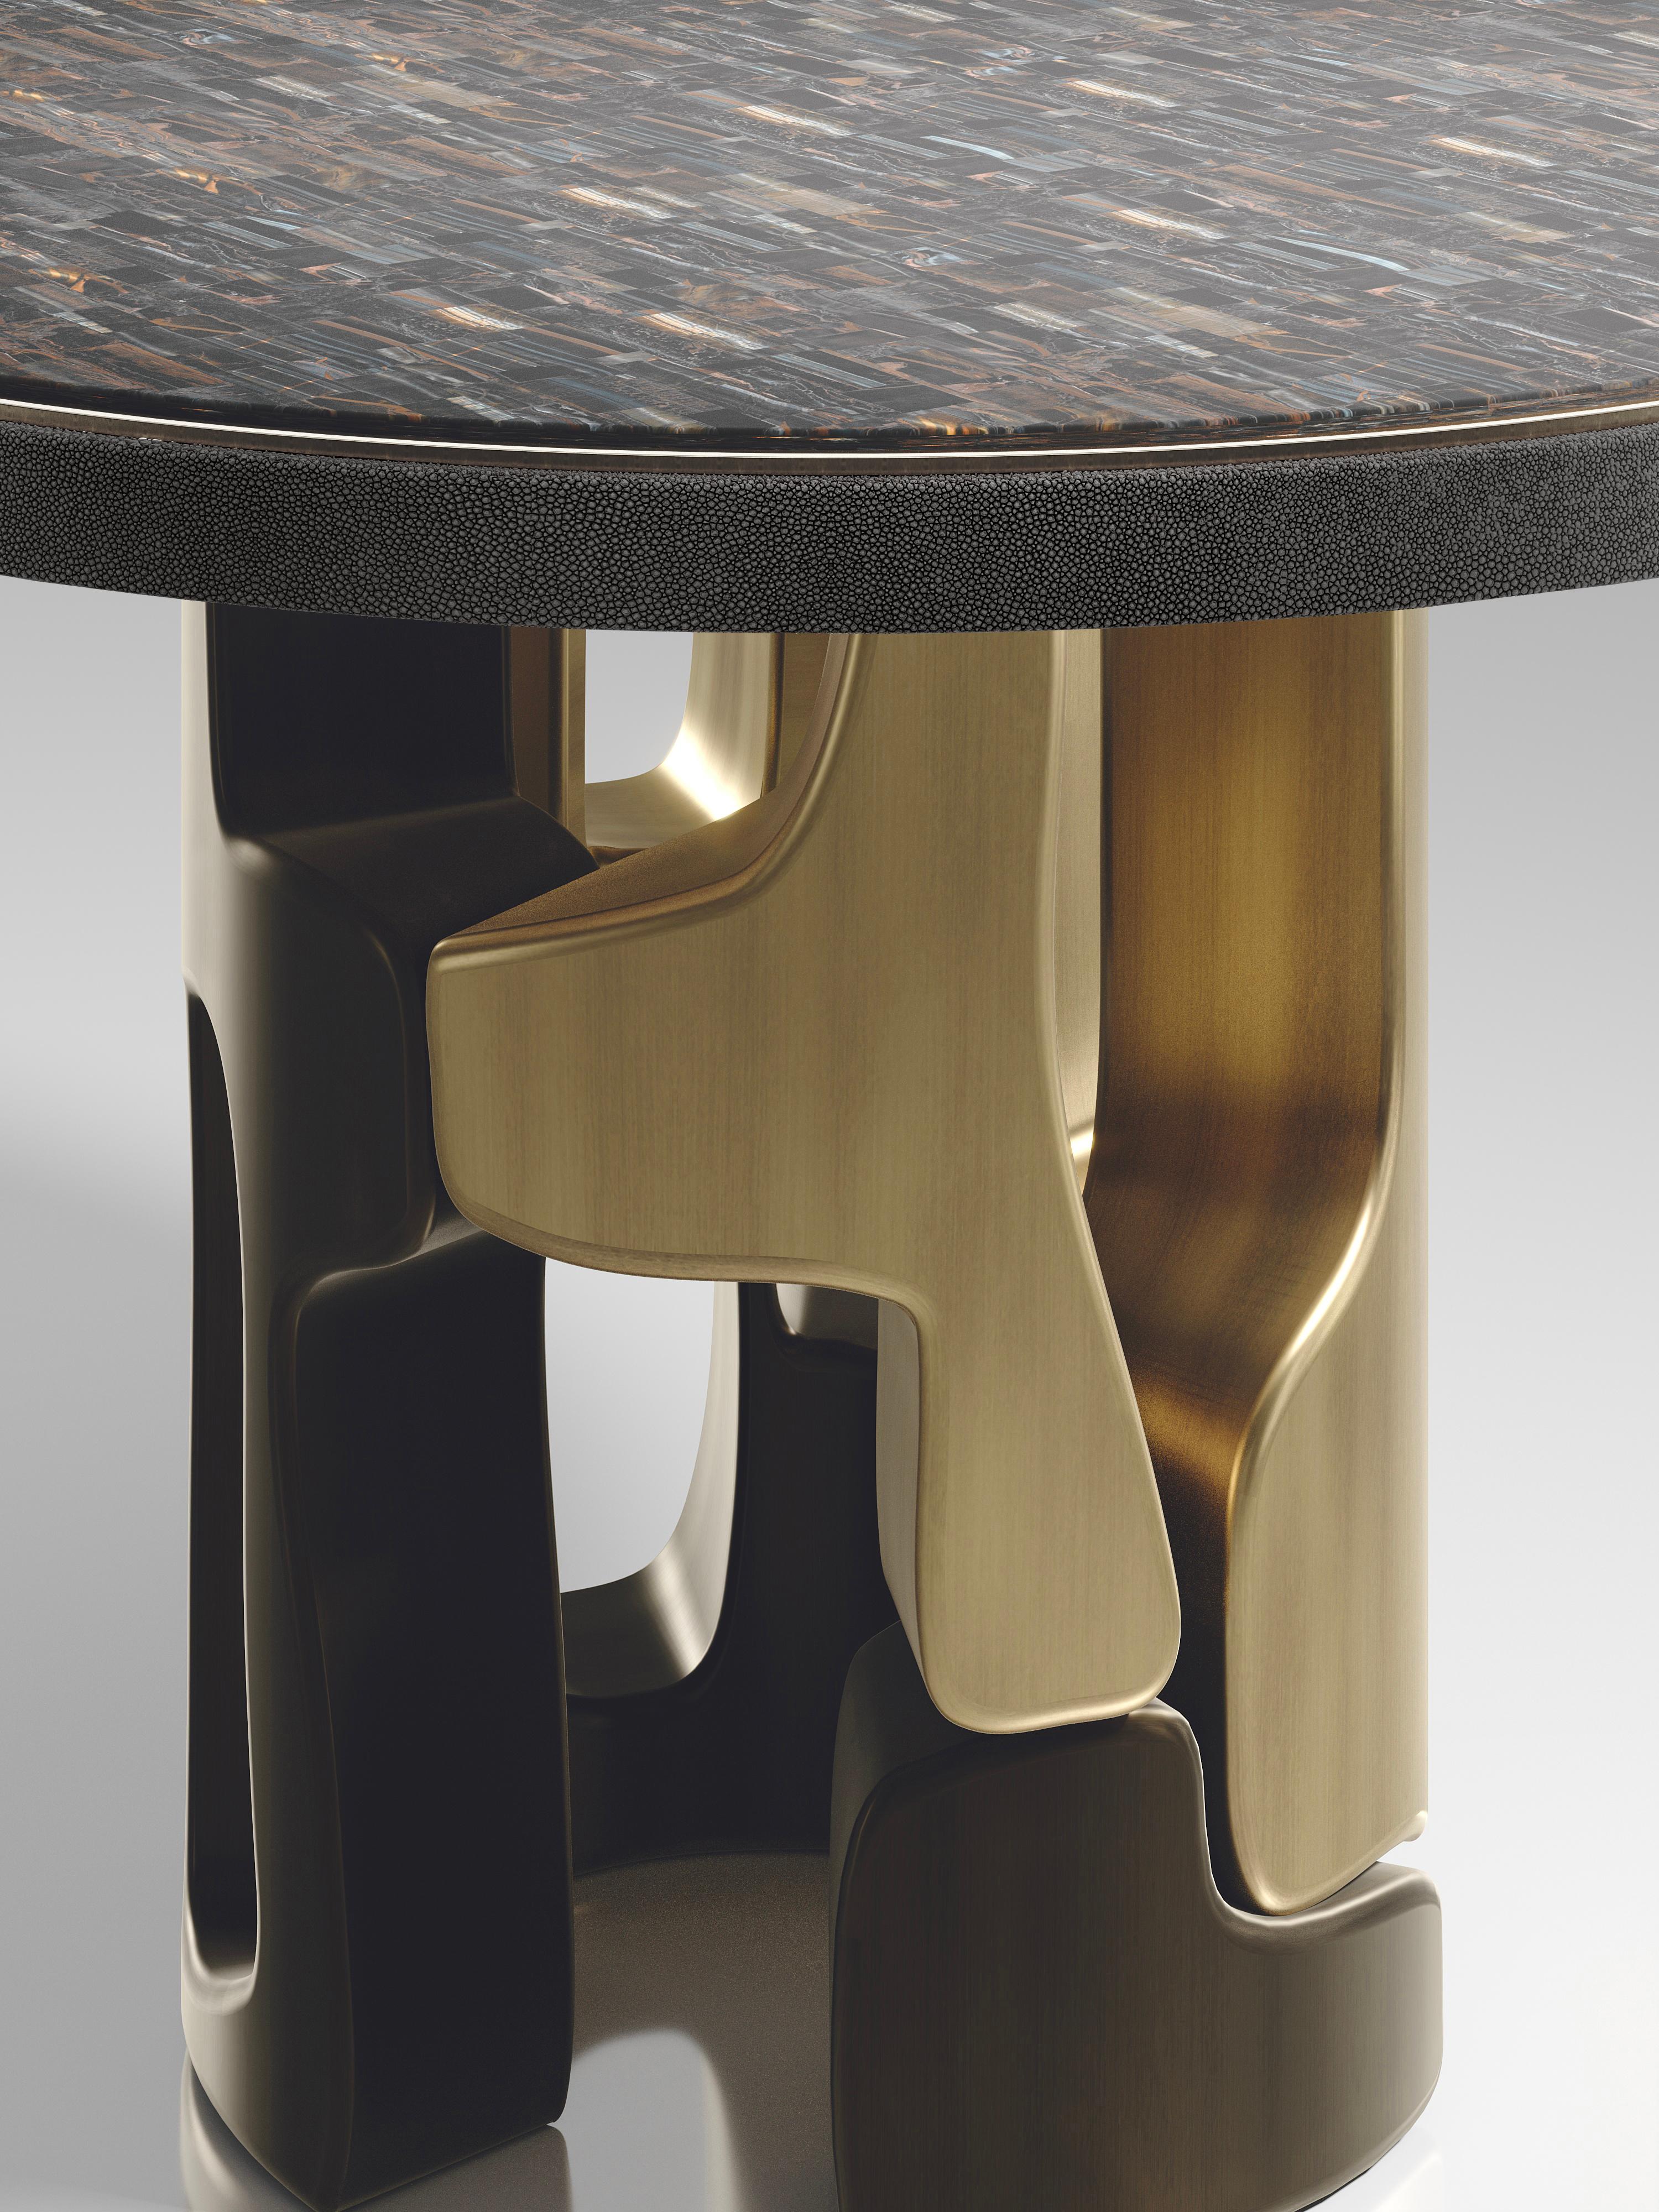 The Apoli breakfast table by Kifu Paris is both dramatic and organic its unique design. The tiger eye blue top sits on an ethereal geometric and sculptural bronze-patina brass base. The side band of the table is inlaid in black shagreen This piece